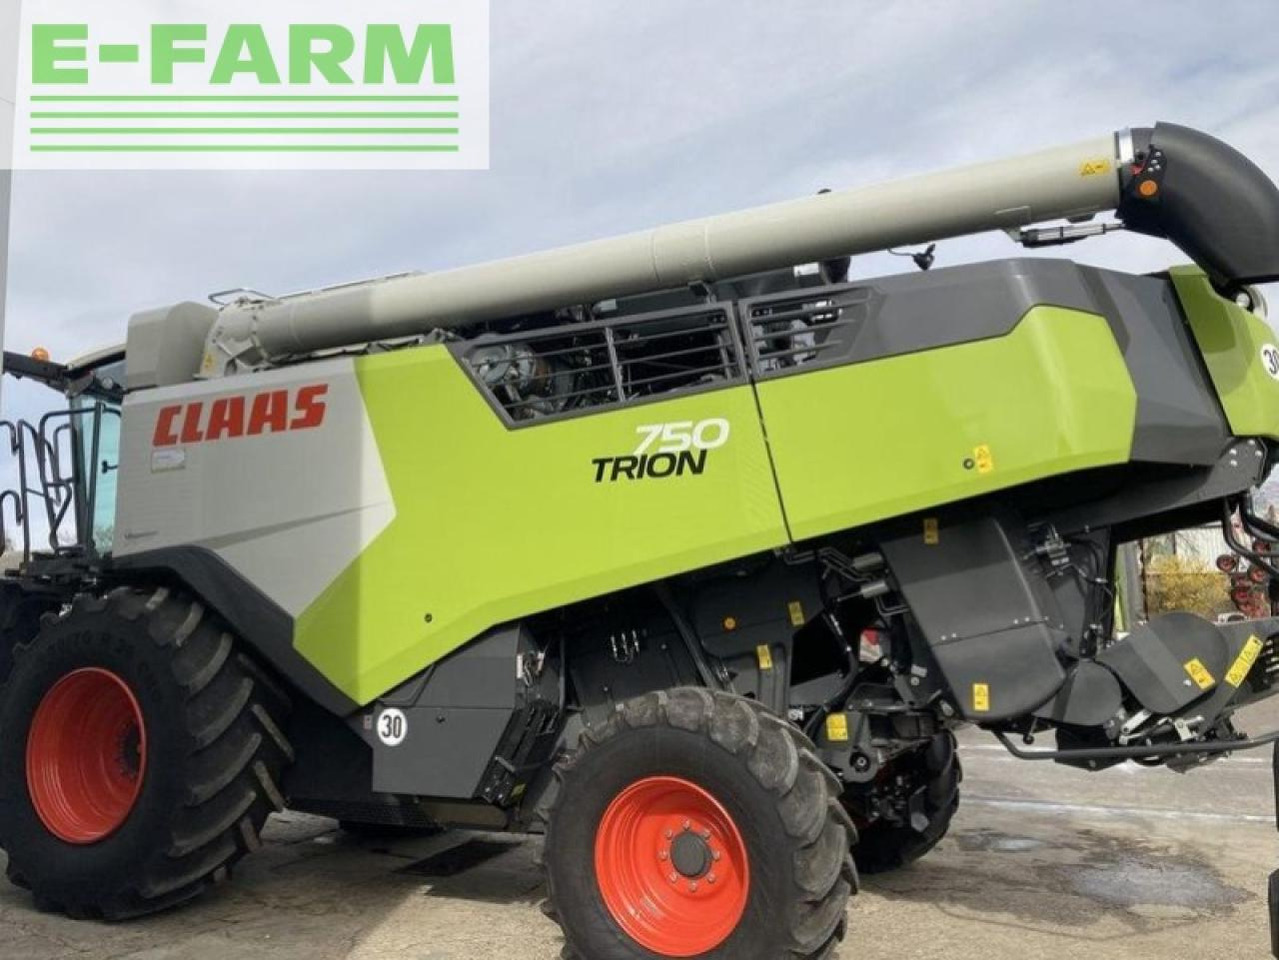 Combine harvester CLAAS trion 750: picture 3